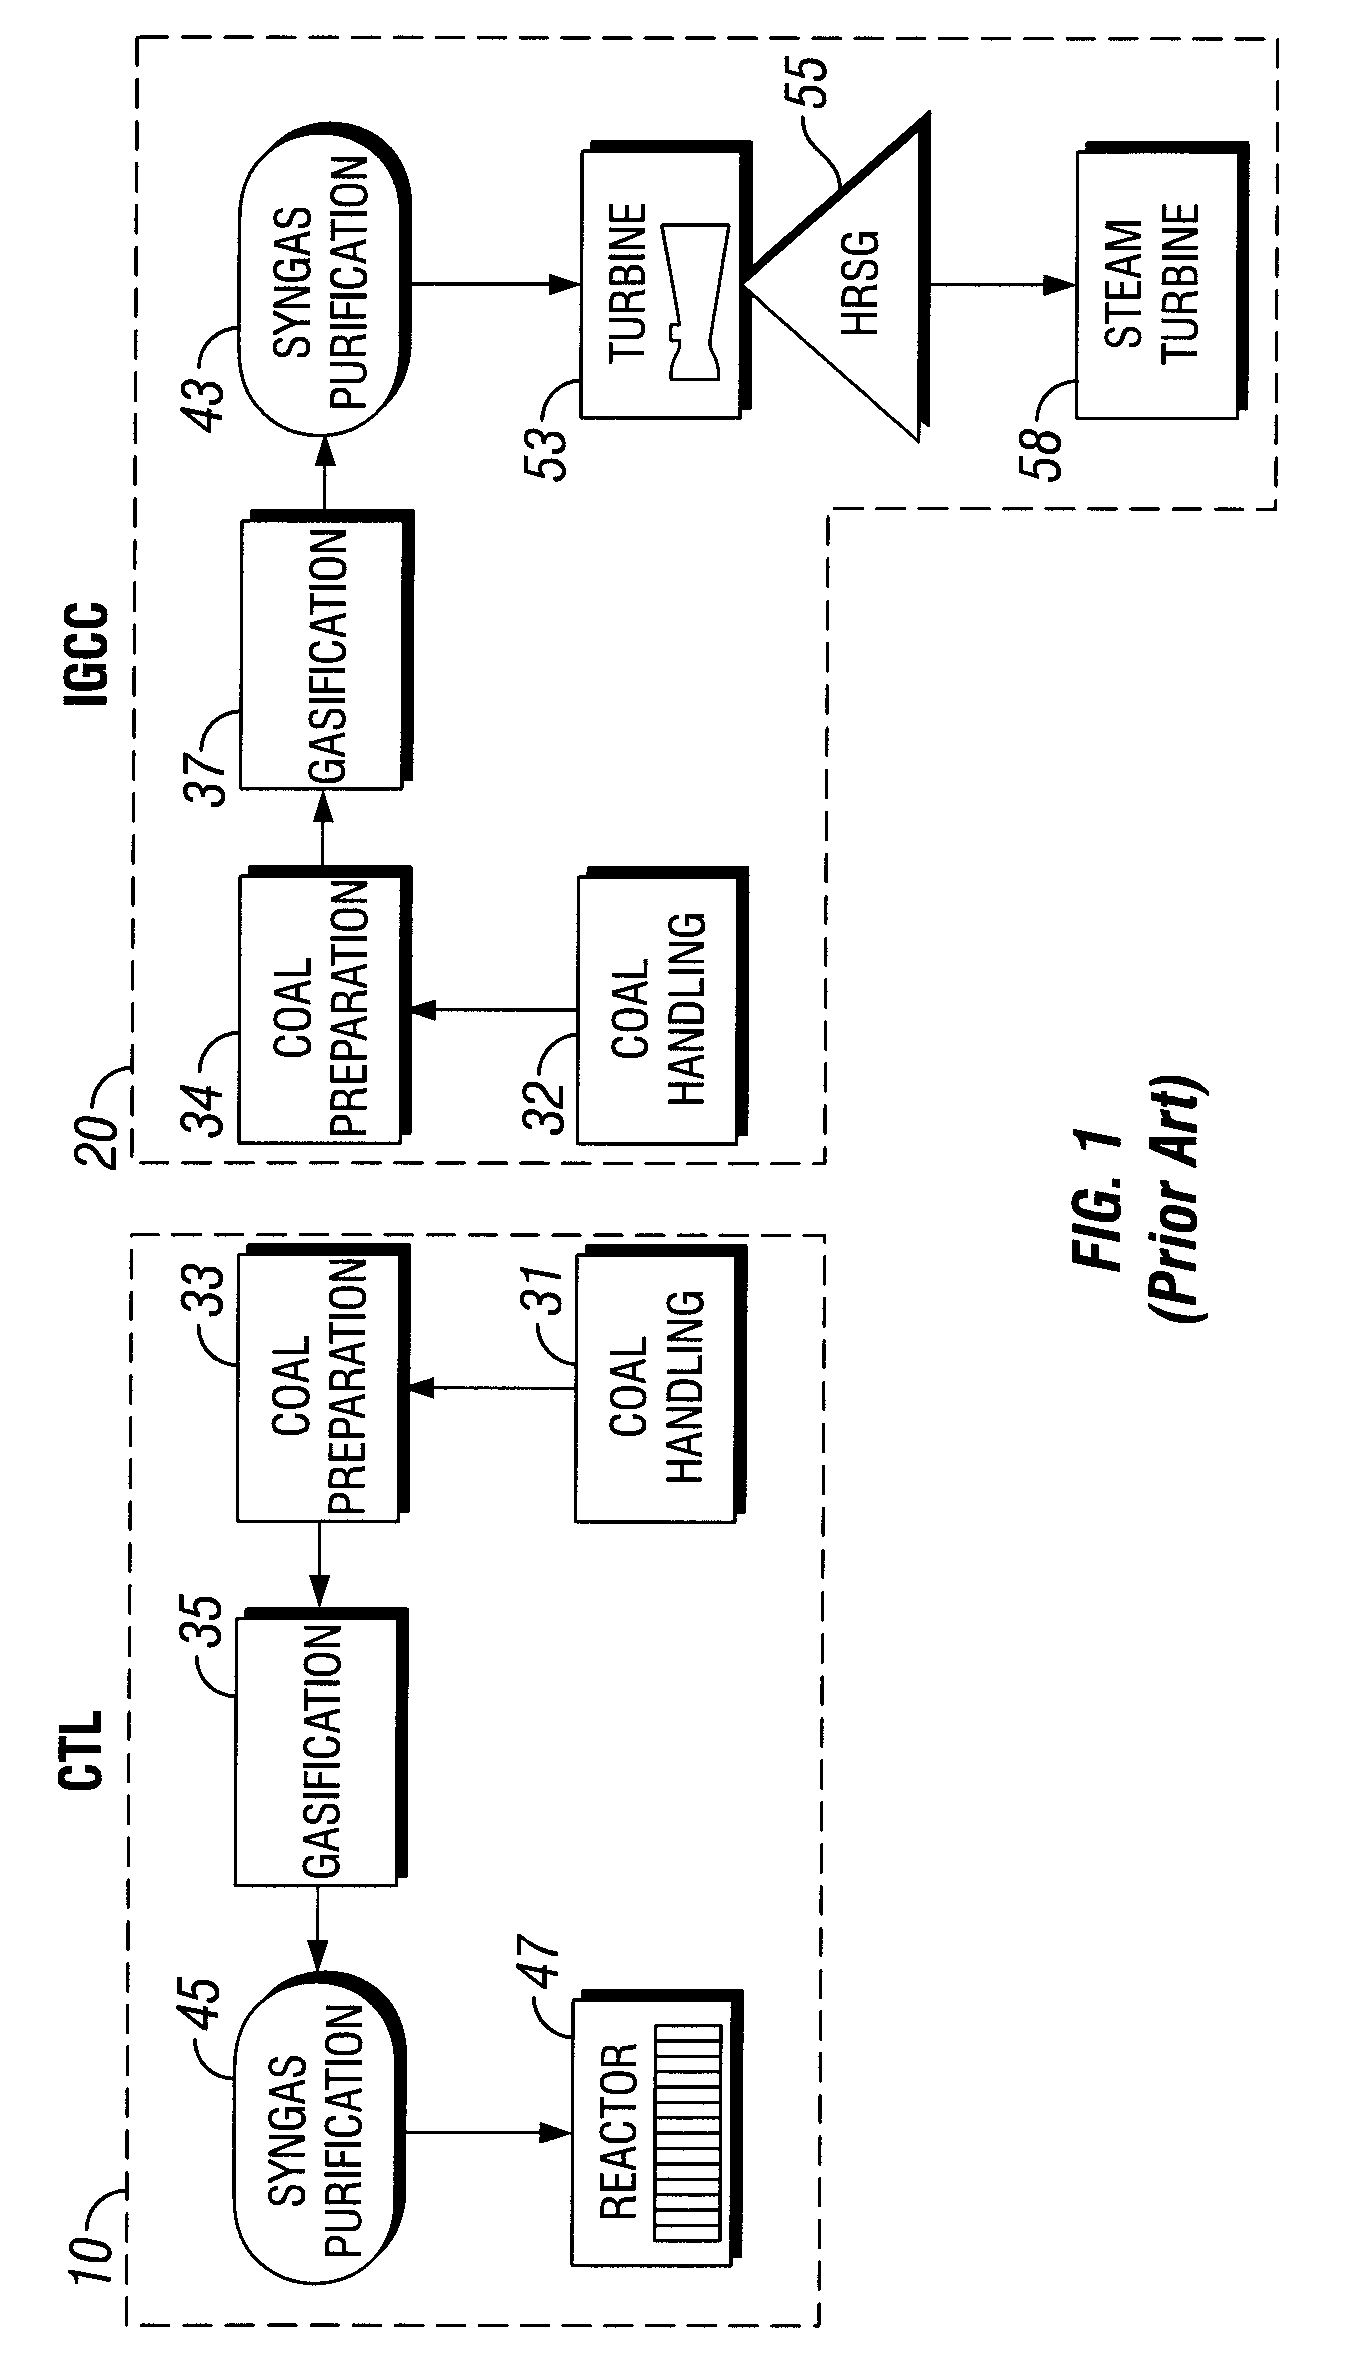 Integration of an integrated gasification combined cycle power plant and coal to liquid facility